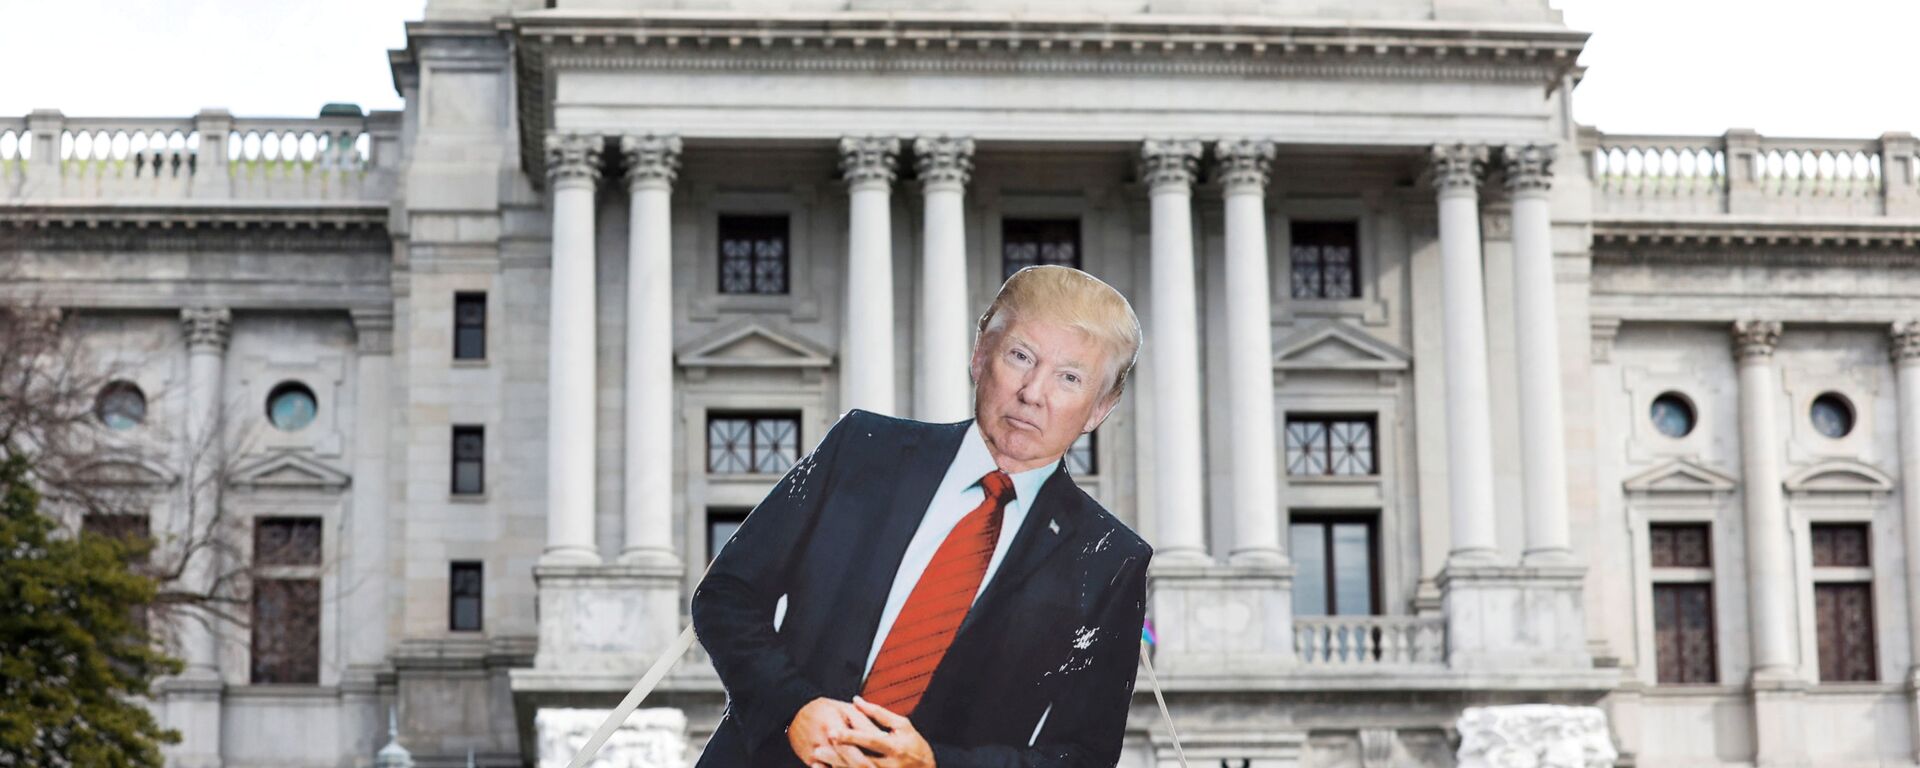 A cardboard cutout depicting U.S. President Donald Trump is seen in front of Pennsylvania State Capitol, as supporters of him are expected to protest against the election of President-elect Joe Biden, outside the Pennsylvania State Capitol in Harrisburg, Pennsylvania, U.S. January 17, 2021 - Sputnik International, 1920, 02.11.2021